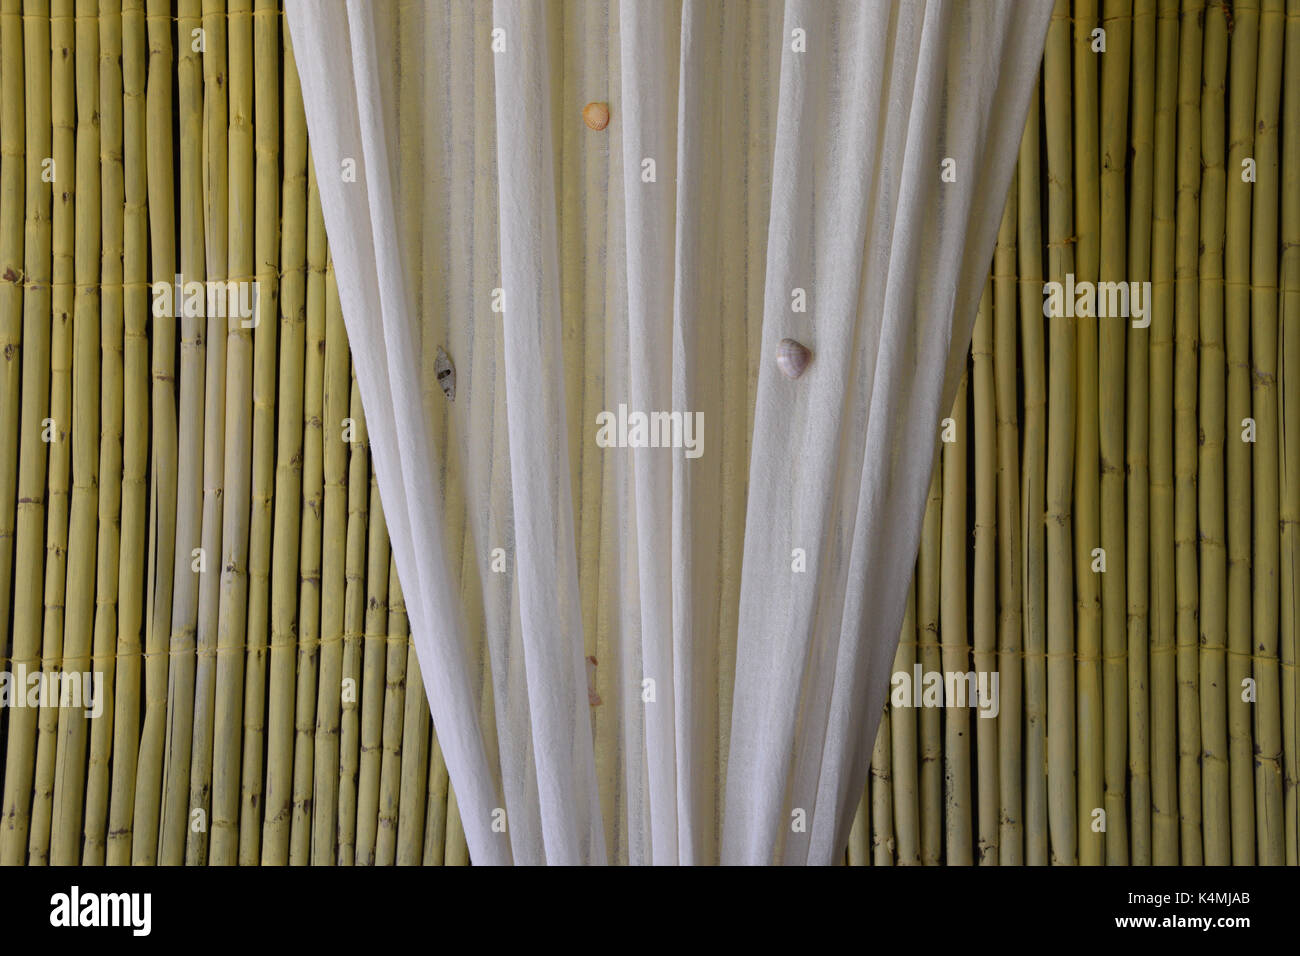 Curtain with seashells and bamboo branches background. Decoration with natural material. Stock Photo